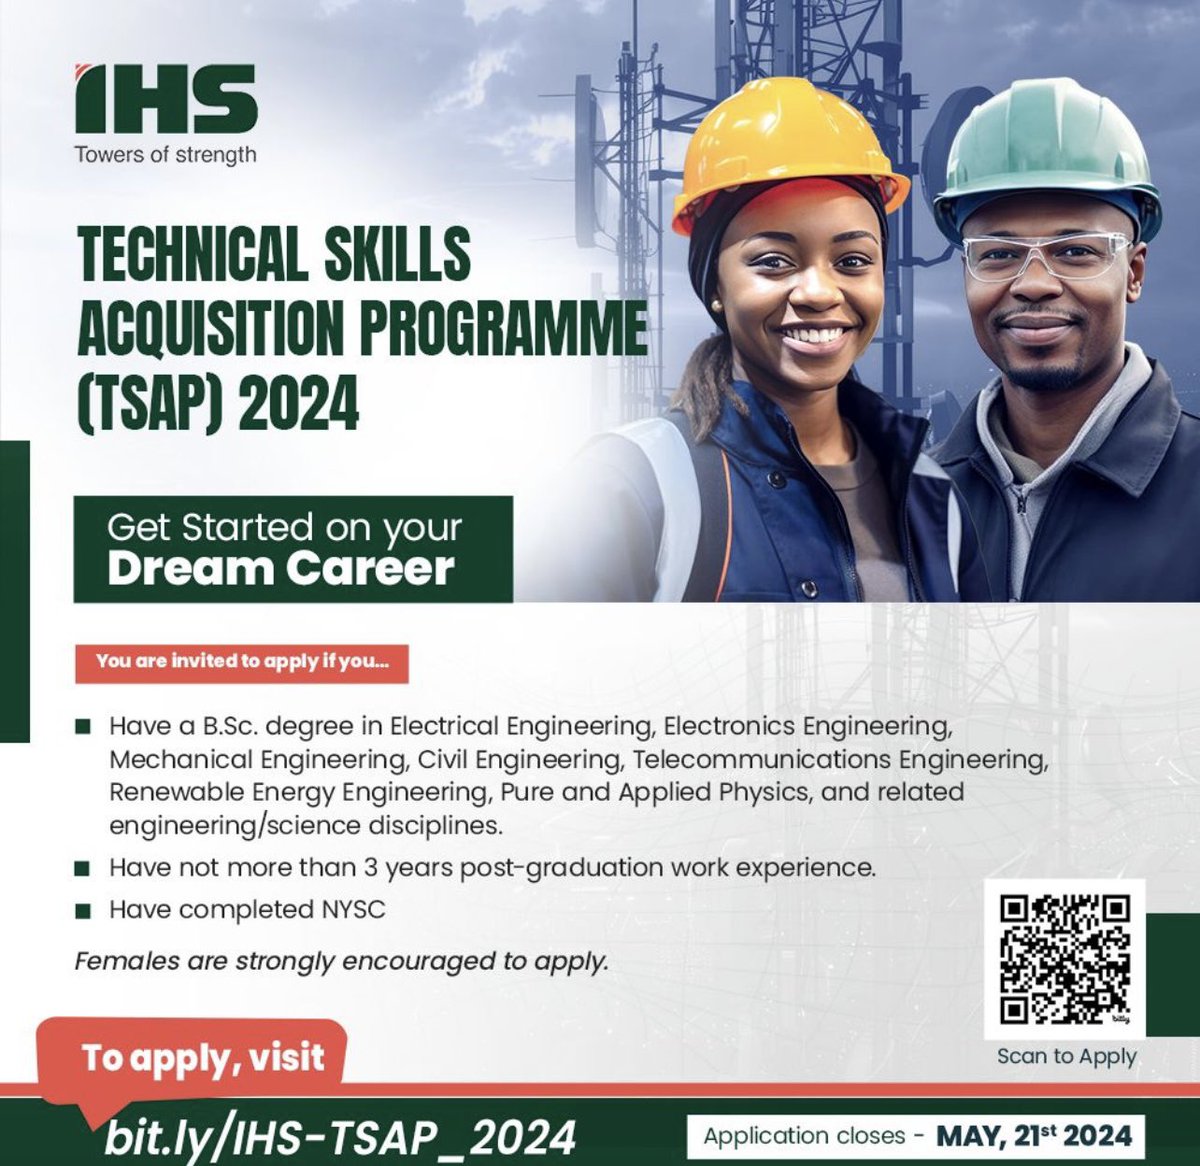 IHS TECHNICAL SKILLS ACQUISITION PROGRAMME (TSAP) 2024. Take advantage of the opportunity to make an impact in the exciting telecommunications and infrastructure industry. You should apply if you: - have a university degree with maximum of 3 years from graduation in: